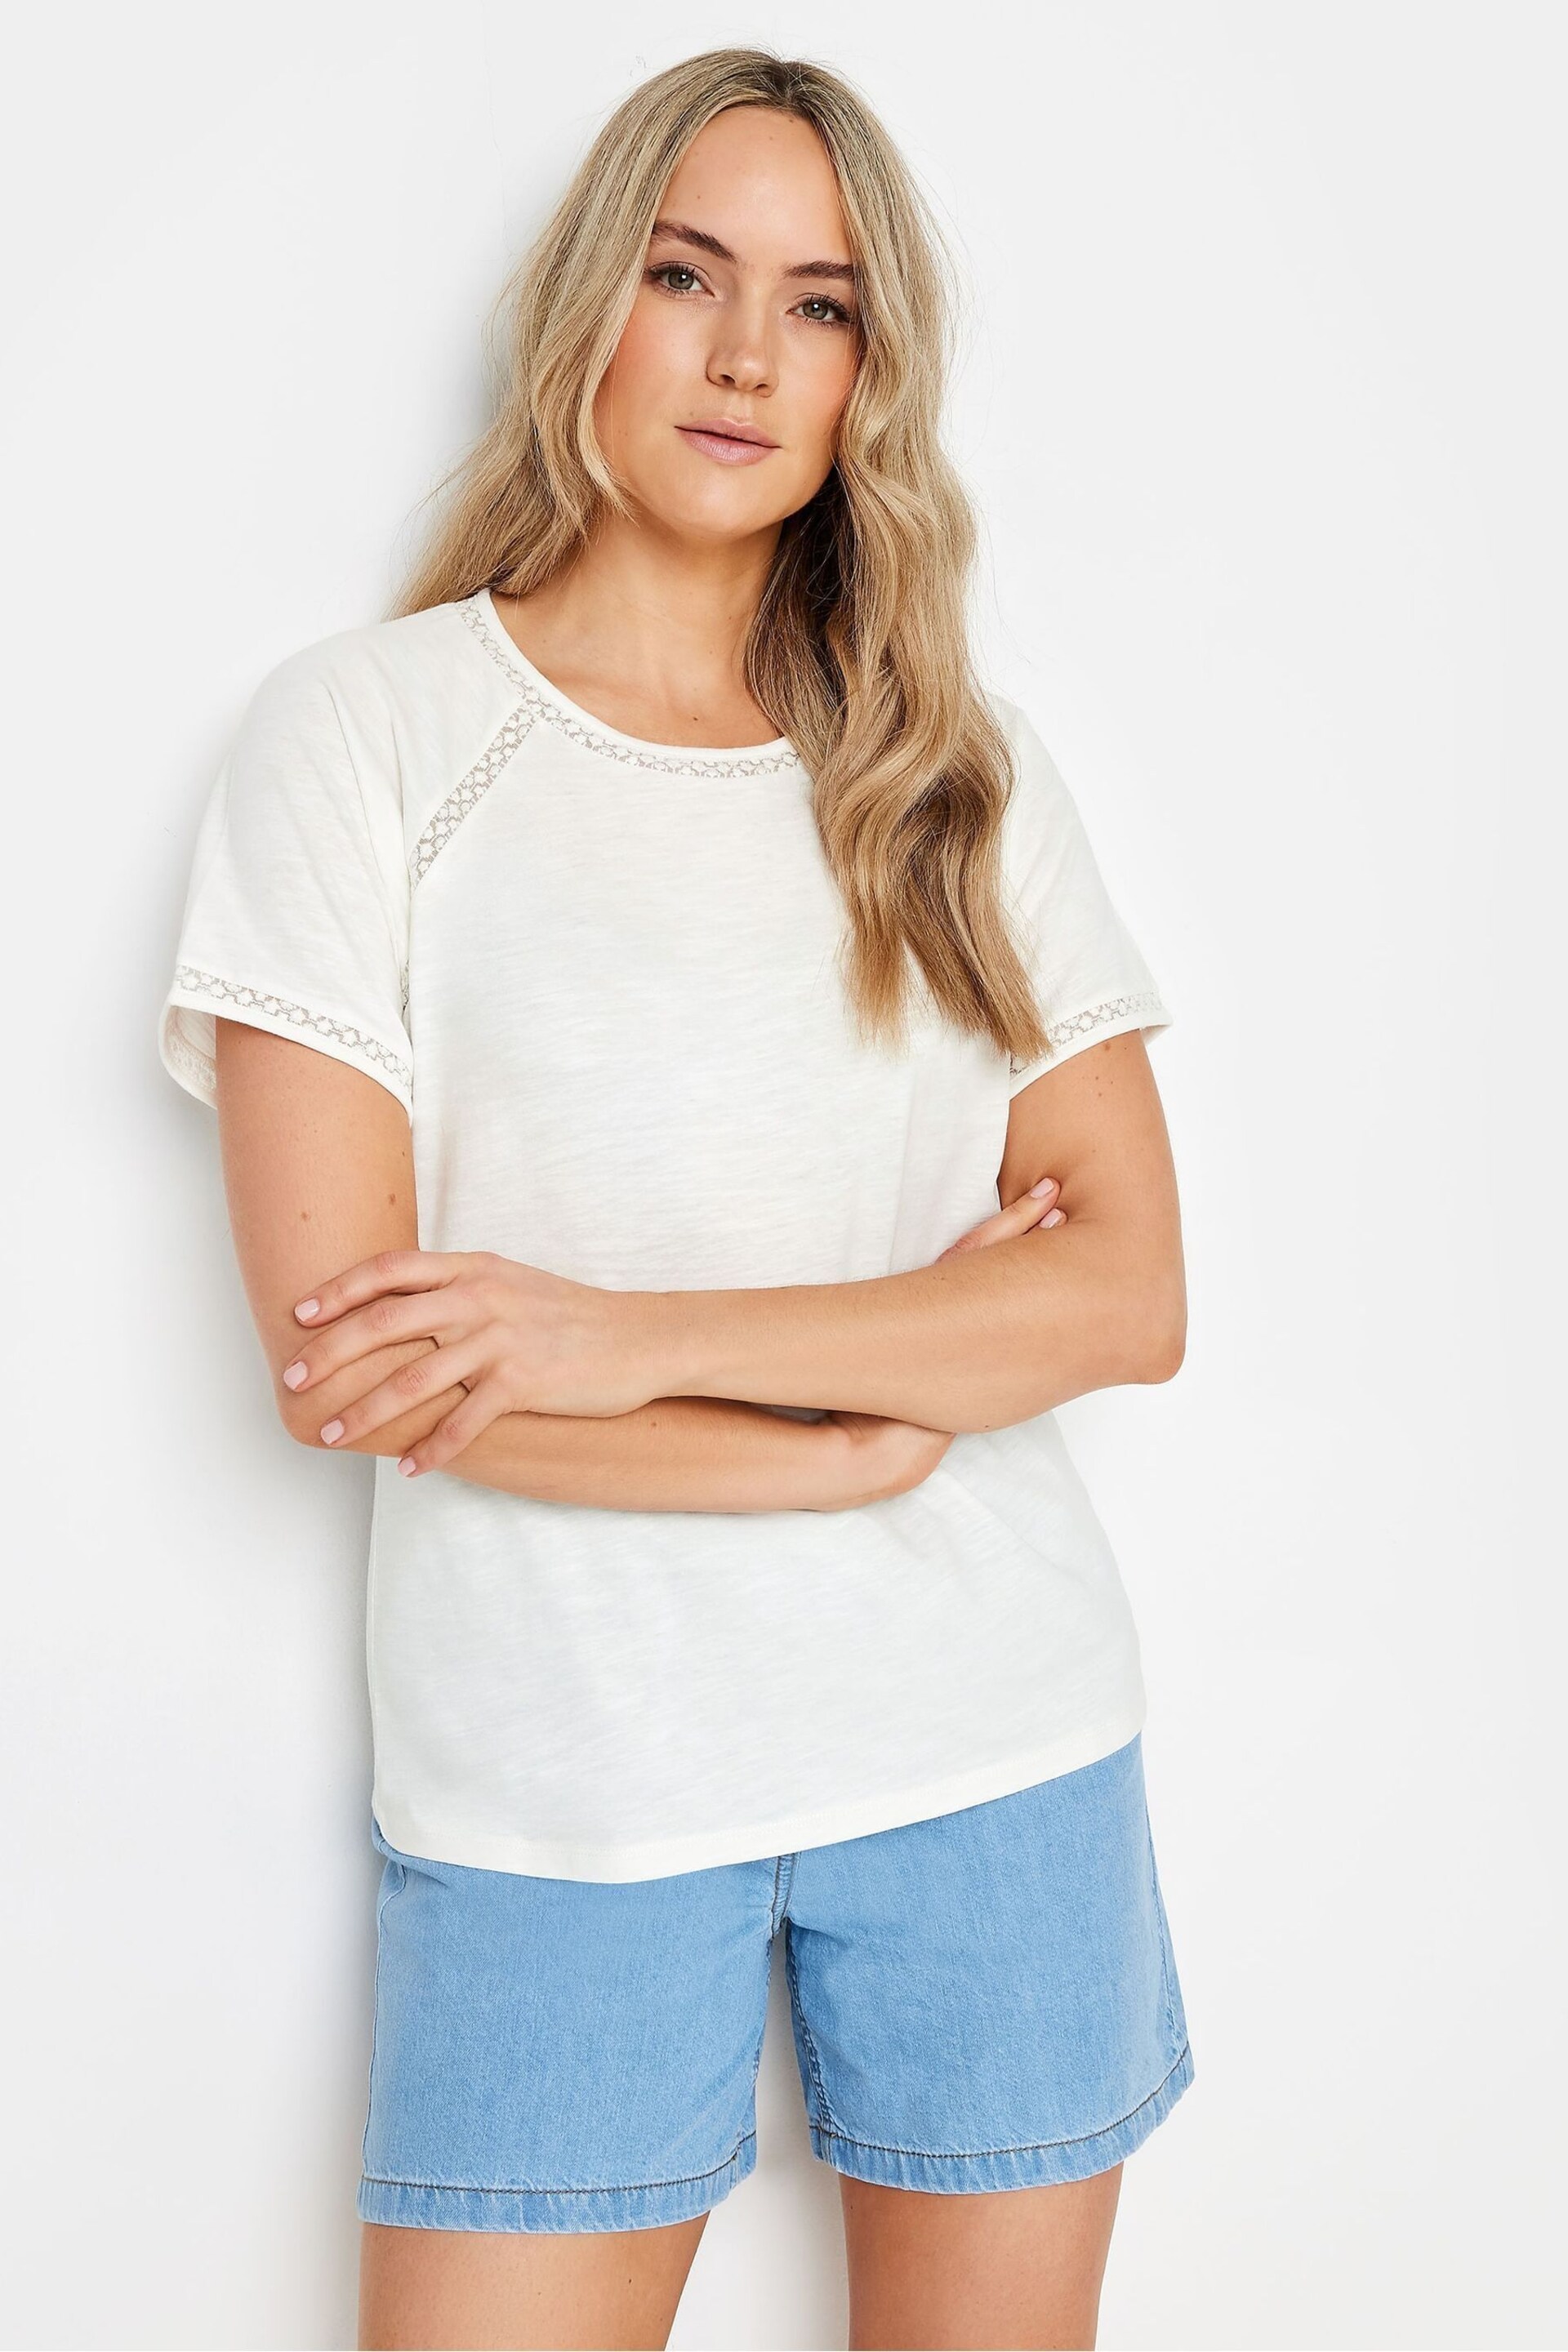 Long Tall Sally Cream Lace Insert Top - Image 1 of 5